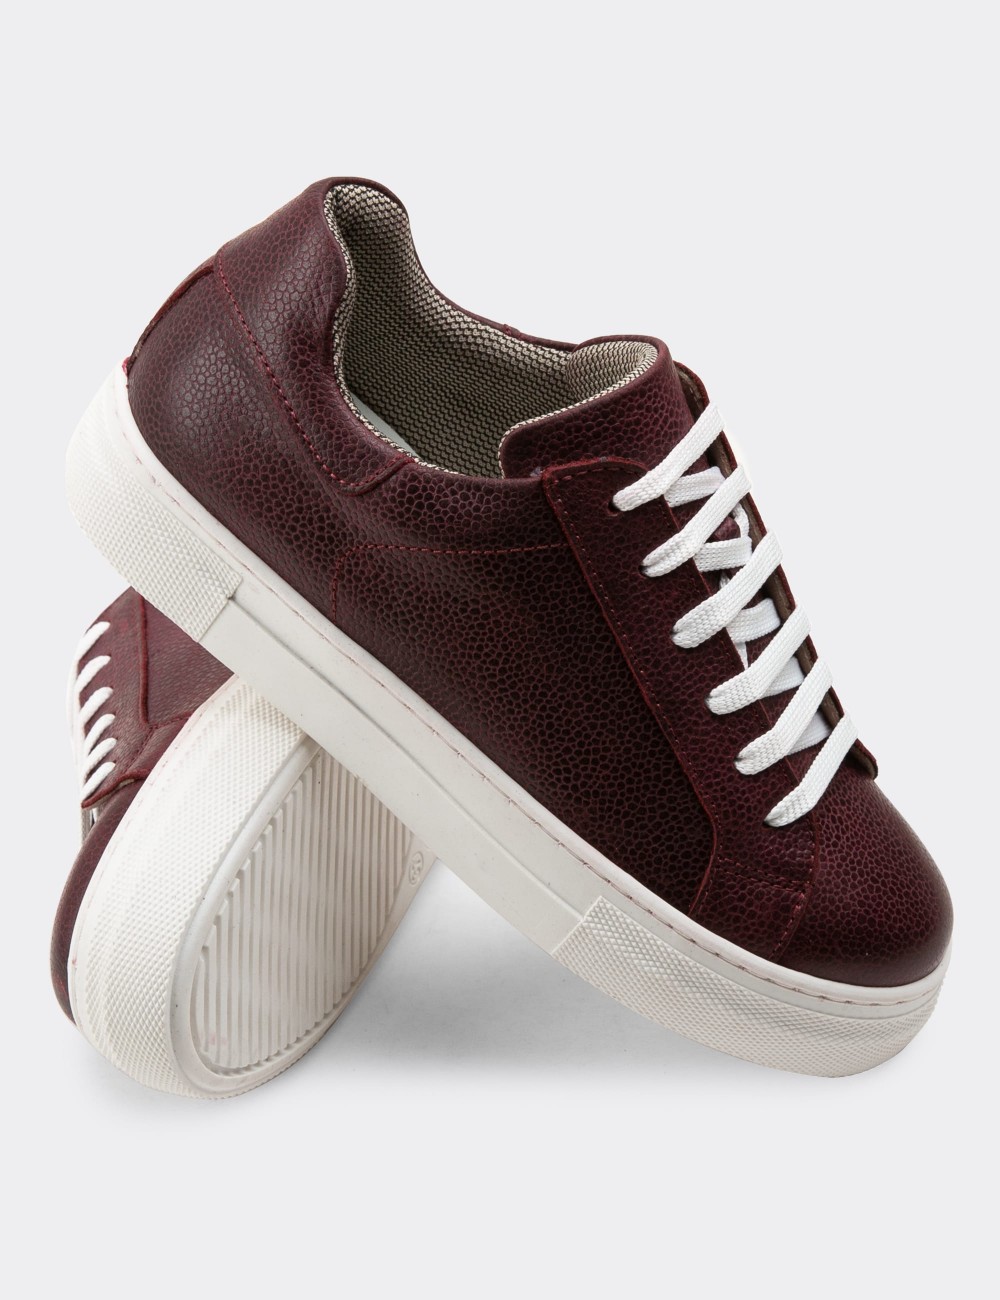 Burgundy  Leather Sneakers - Z1681ZBRDC04